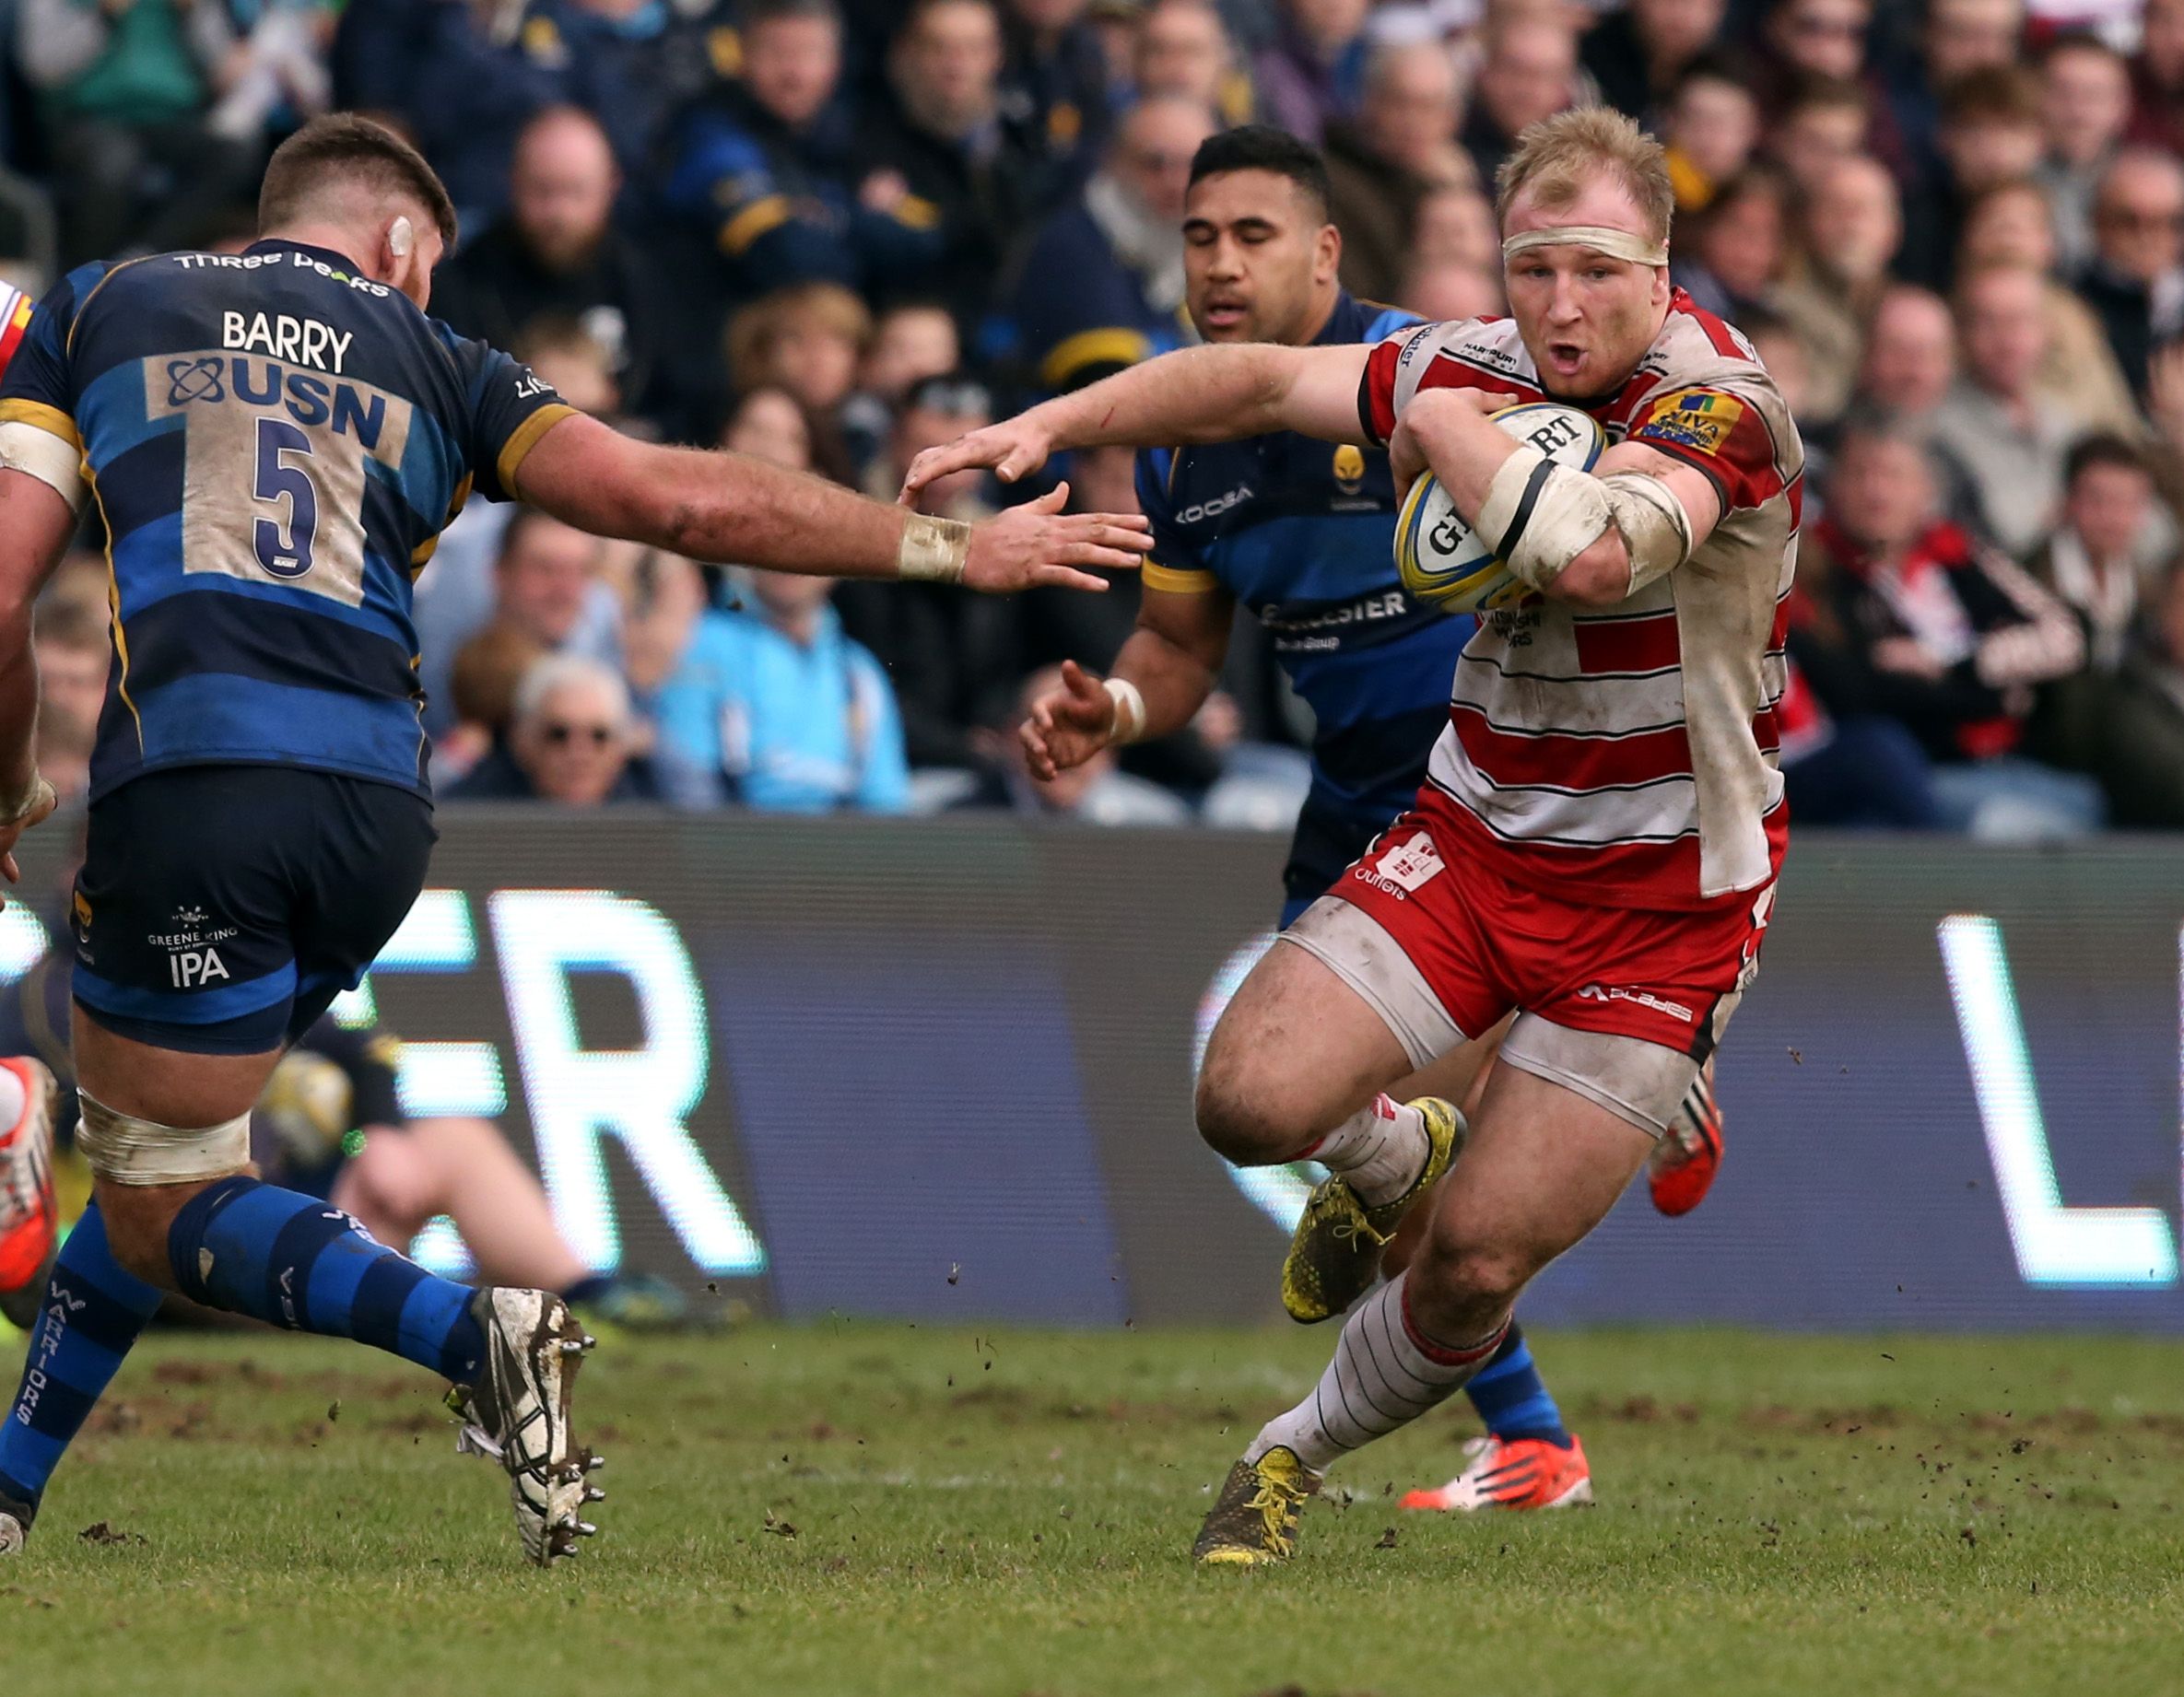 WORCESTER, ENGLAND - MARCH 12: Matt Kvesic of Gloucester Rugby breaks against Worcester Warriors during the Aviva Premiership match between Worcester Warriors and Gloucester Rugby at Sixways Stadium on March 12, 2016 in Worcester, England. (Photo by David Jones/Getty Images)